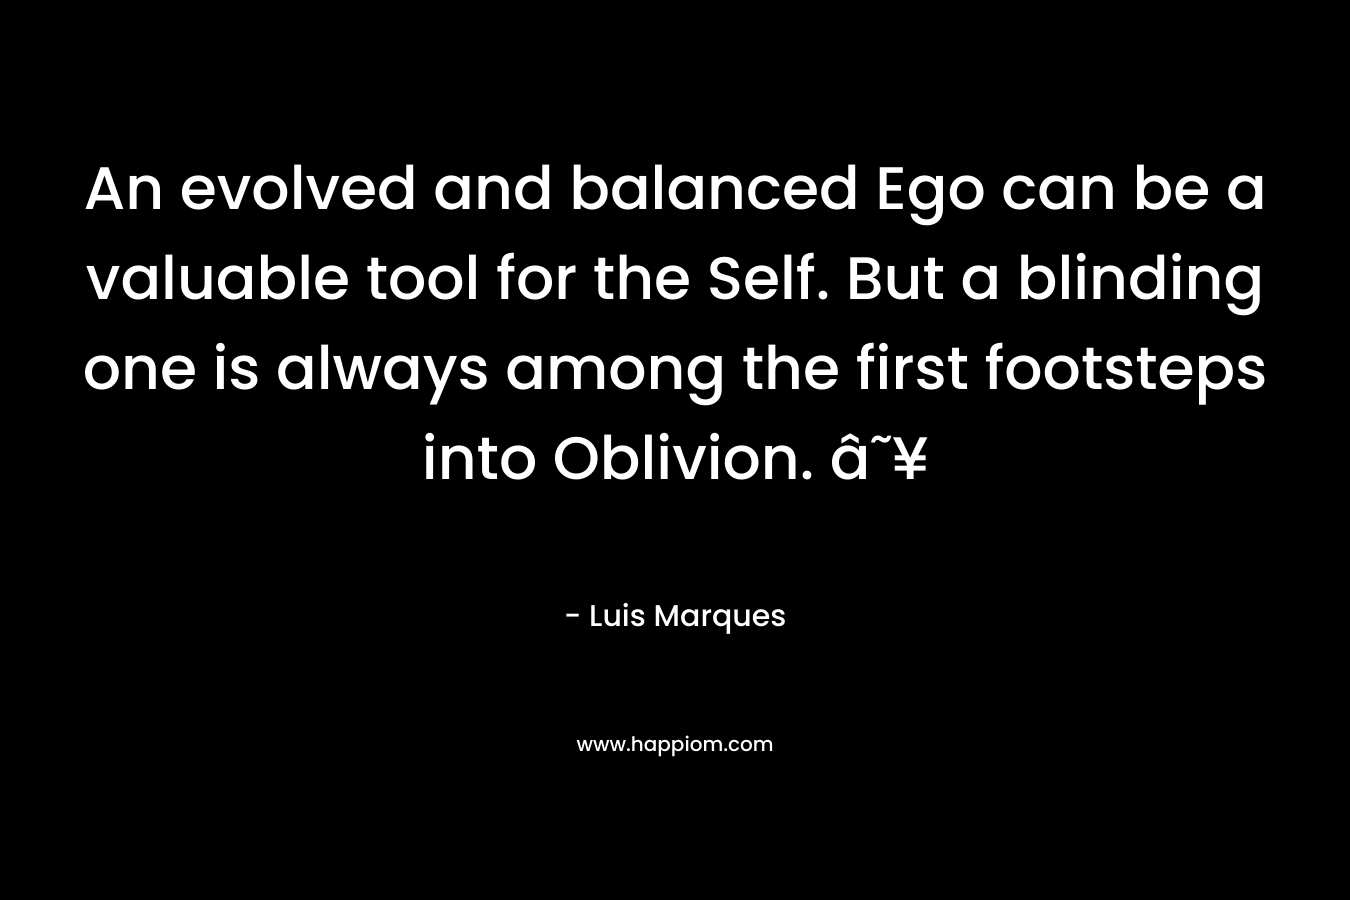 An evolved and balanced Ego can be a valuable tool for the Self. But a blinding one is always among the first footsteps into Oblivion. â˜¥